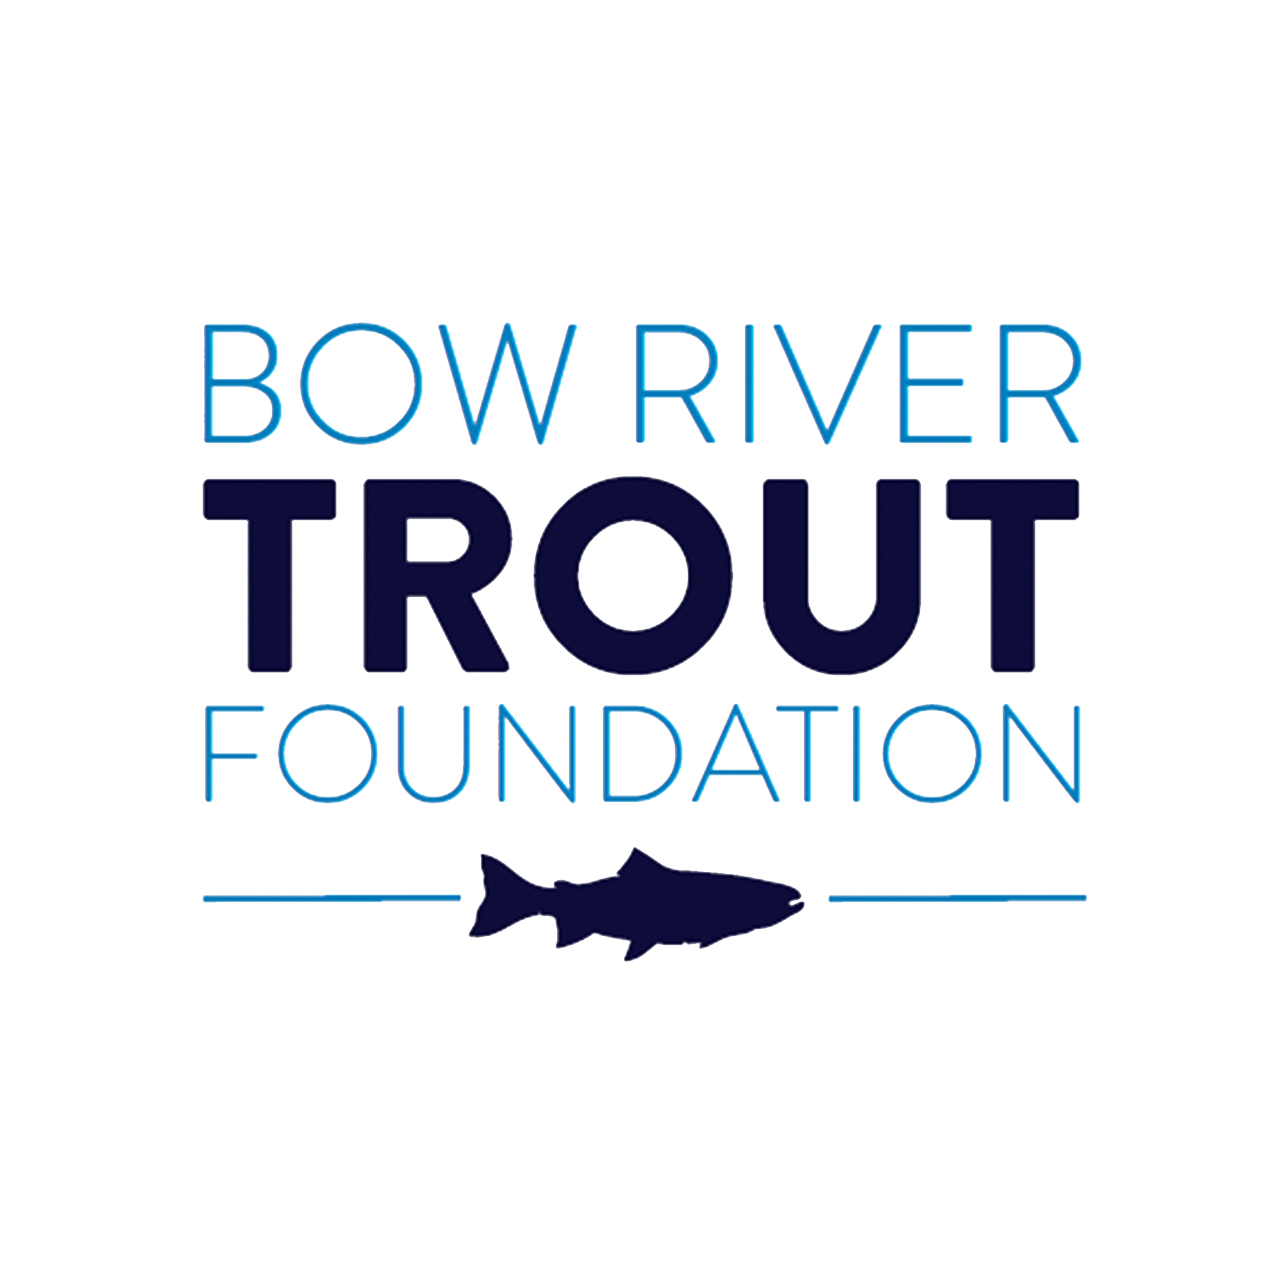 Bow River Trout Foundation